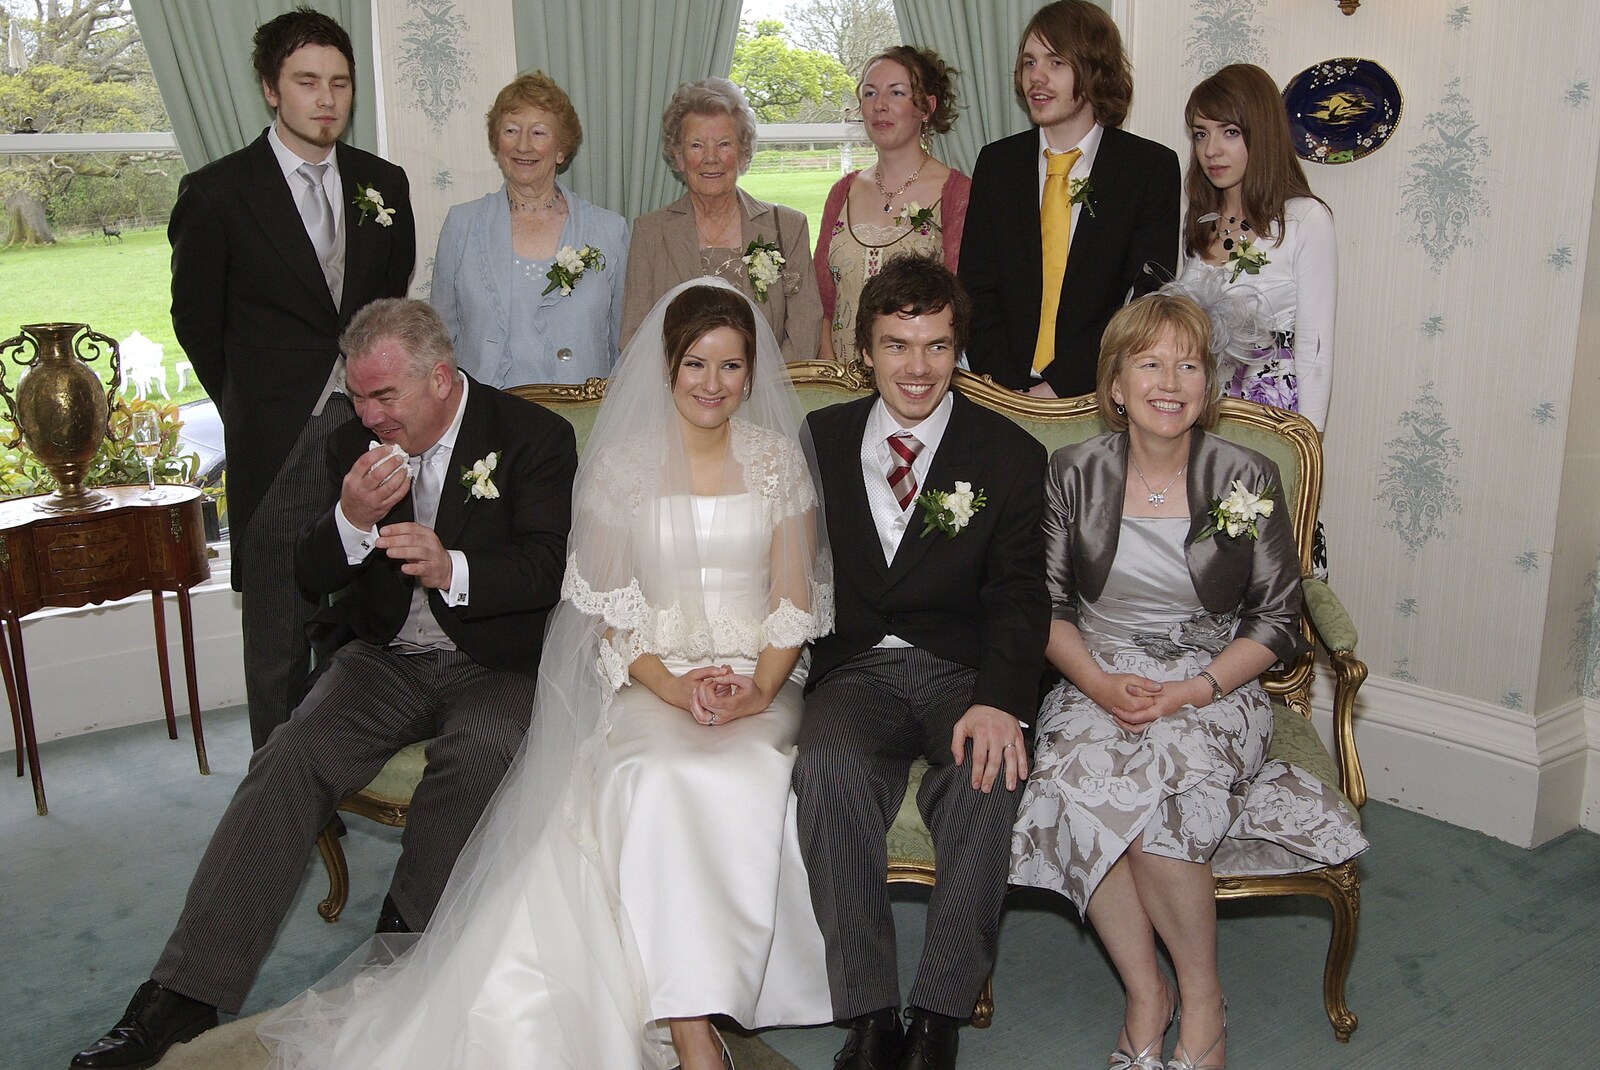 Paul and Jenny's Wedding, Tralee, County Kerry, Ireland - 3rd May 2008: Another wedding shot